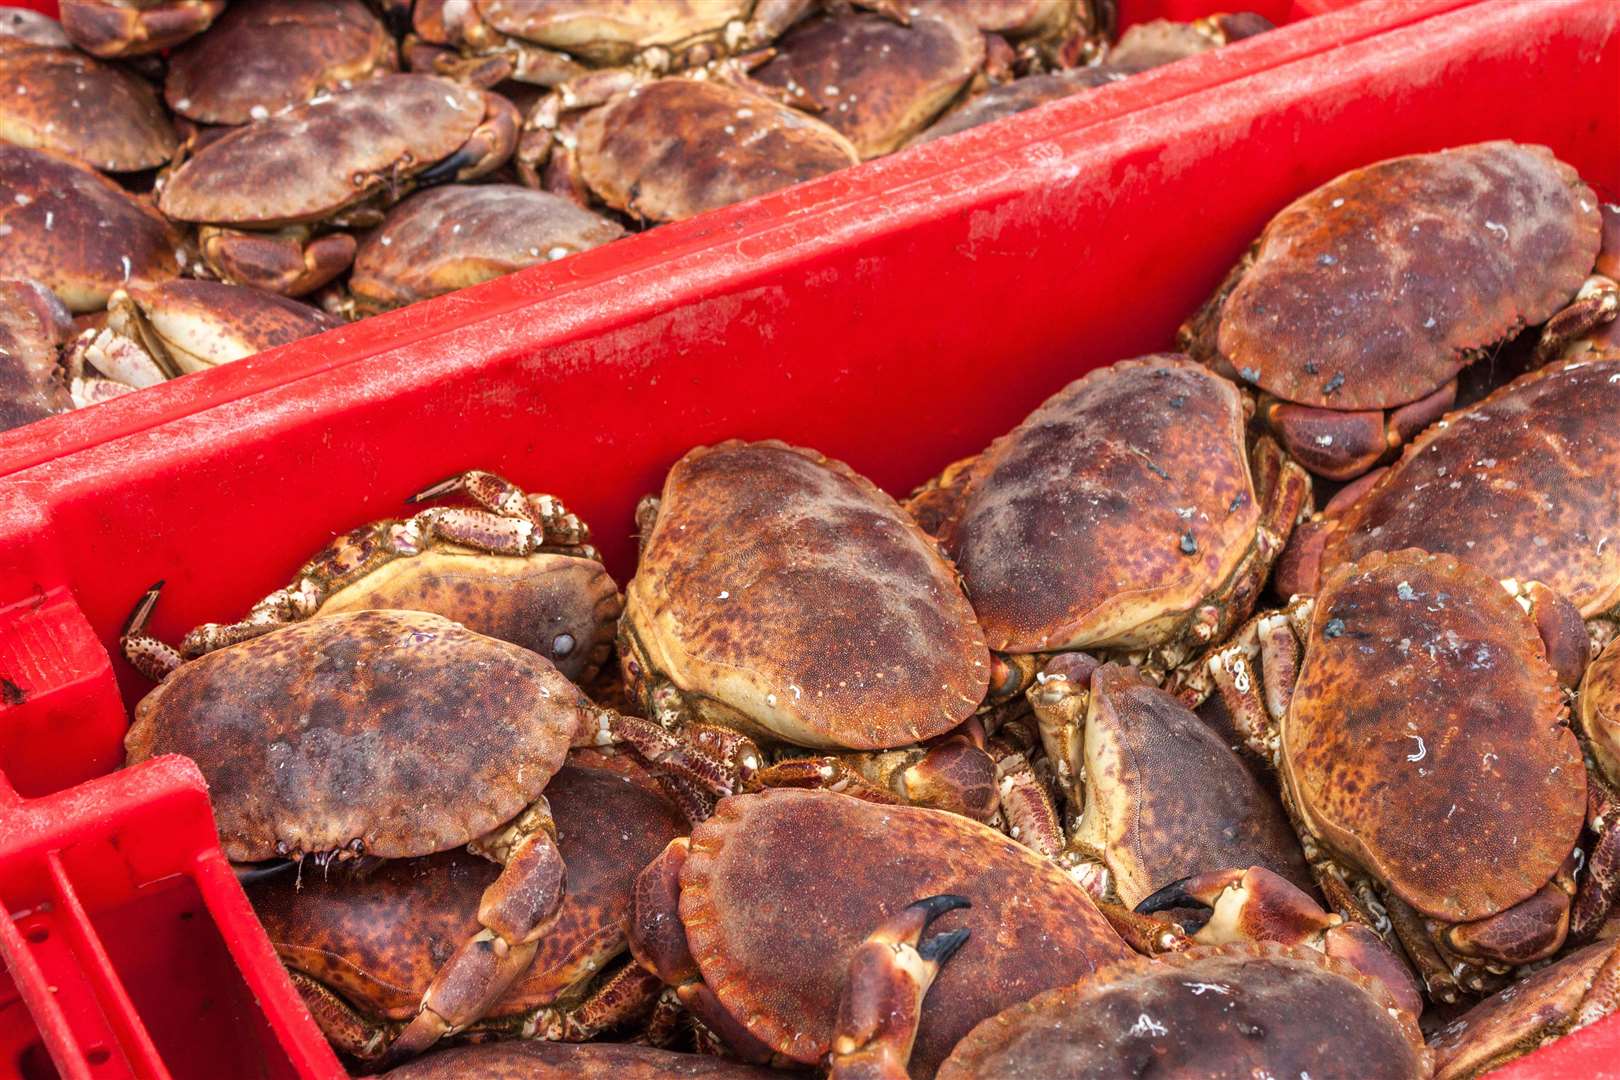 It is estimated that more than 90 per cent of local shellfish goes for export to European Union countries.